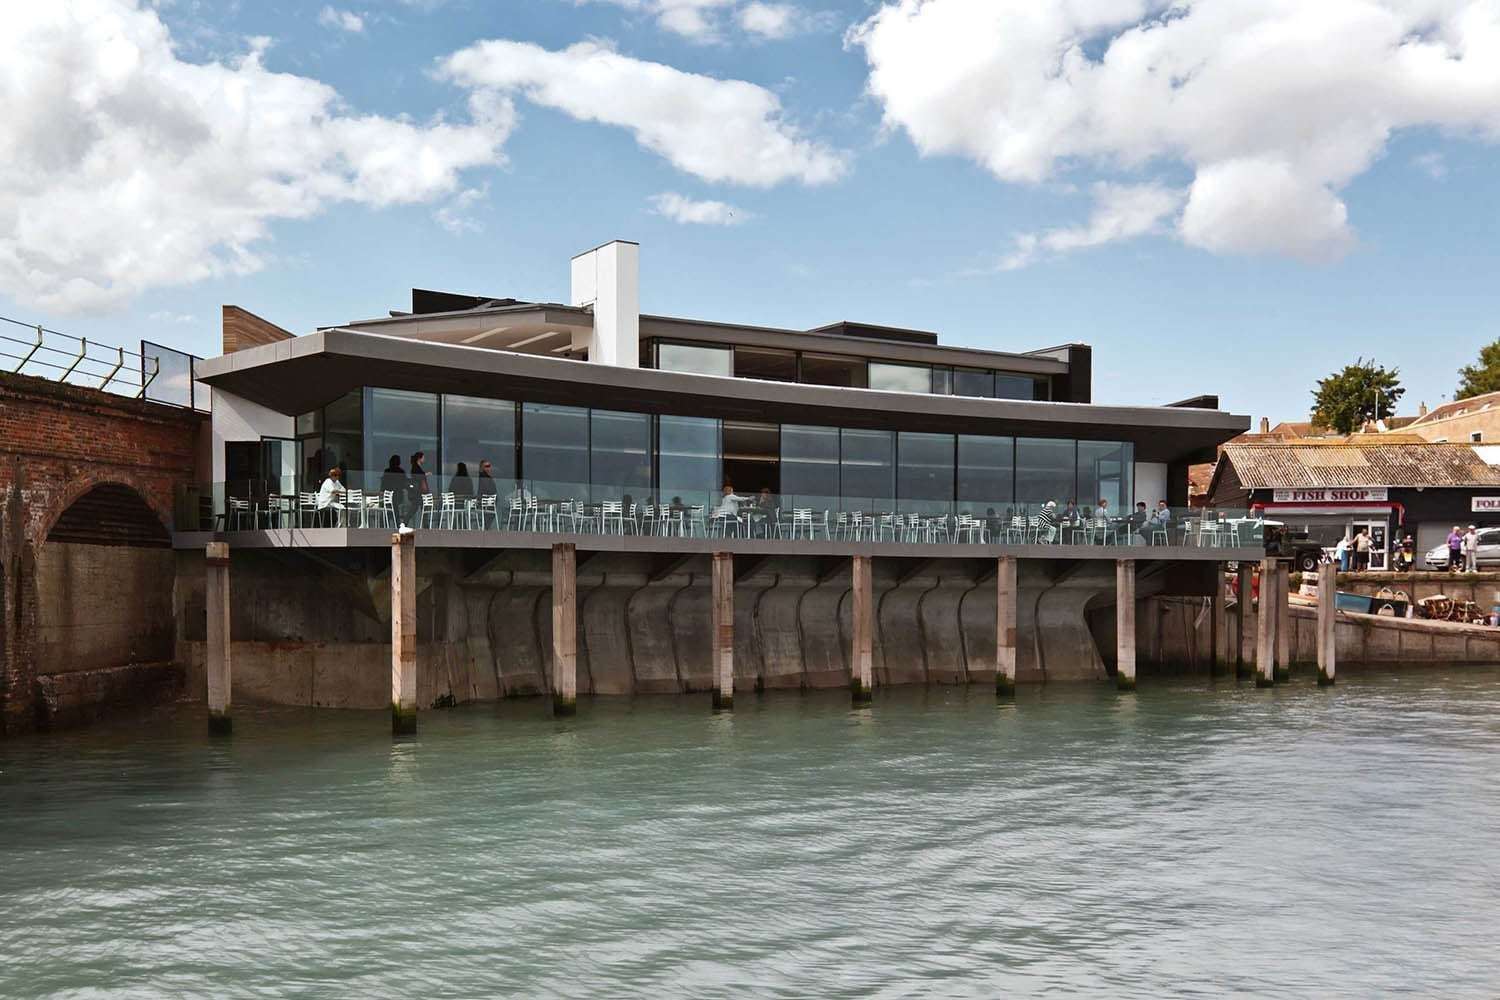 Rocksalt, a luxury seafood restaurant in Folkestone, has lost its place in the Michelin Guide. Picture: Rocksalt